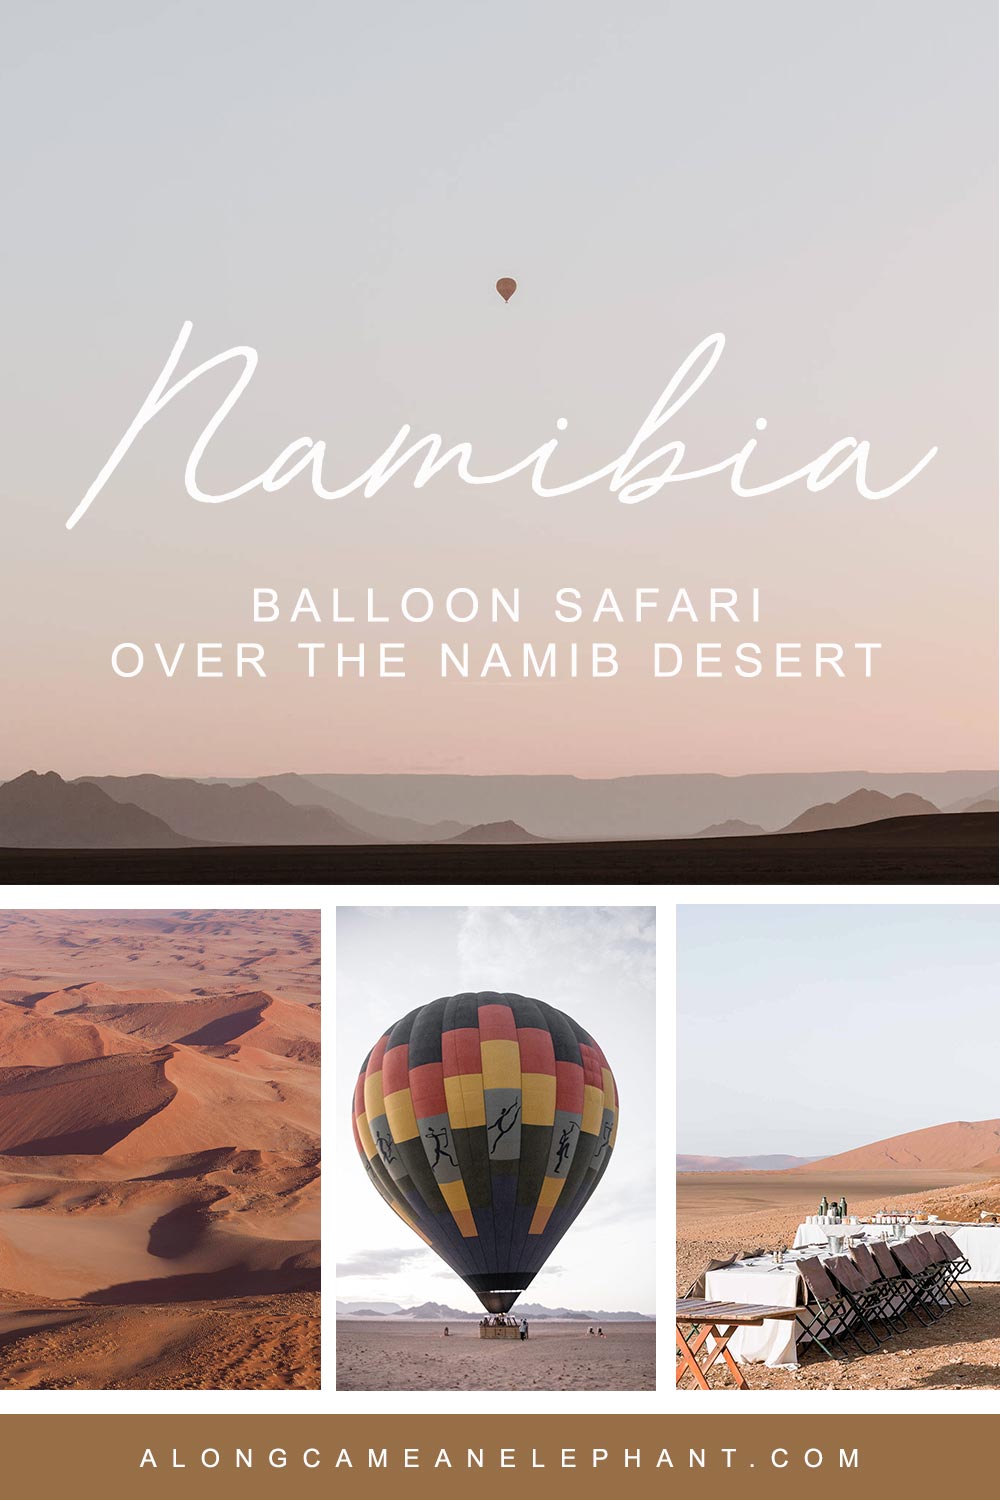 Enjoy Namibia's most famous attraction -Sossusvlei- from above during a hot air balloon ride. One of our most romantic experiences and best things to do in Namibia, the land of rusty sand dunes! 

An incredible day trip floating over beautiful landscapes and enjoying a champagne breakfast once you touch ground in the Namib desert! #namibia #travel #desertexperience #romantictrips #honeymoonnamibia